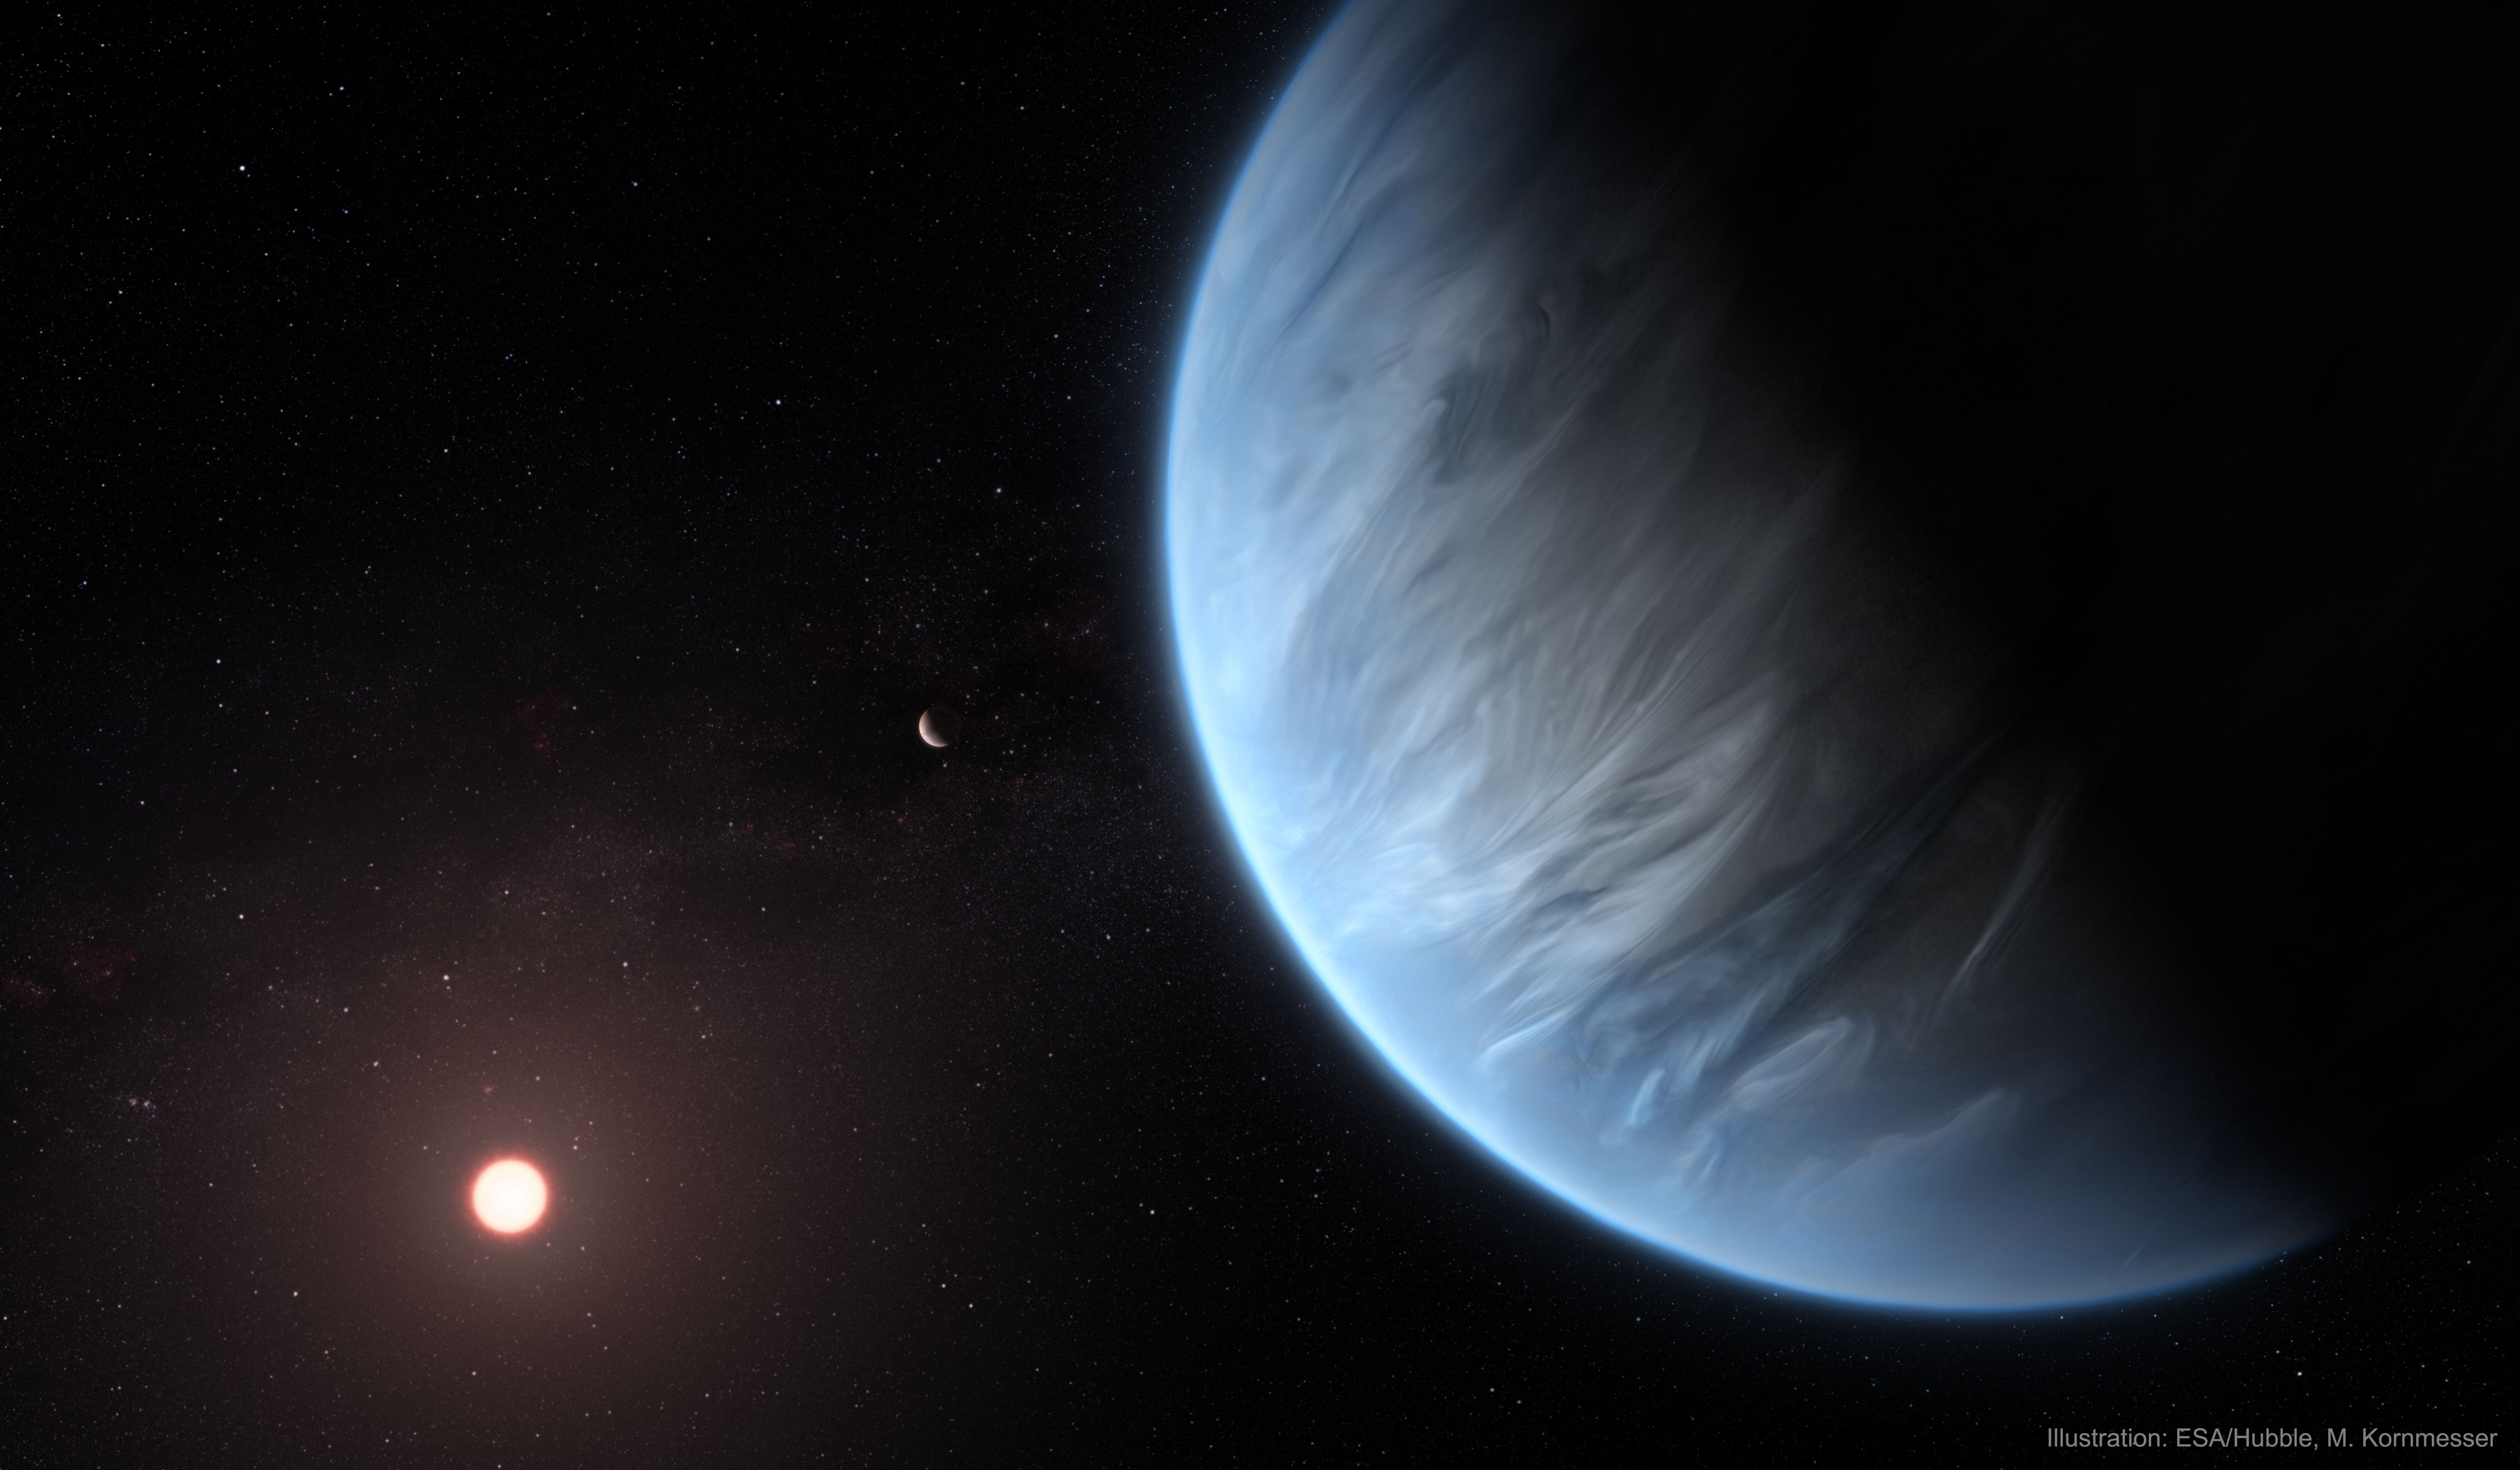 Water Vapor Discovered on Distant Exoplanet